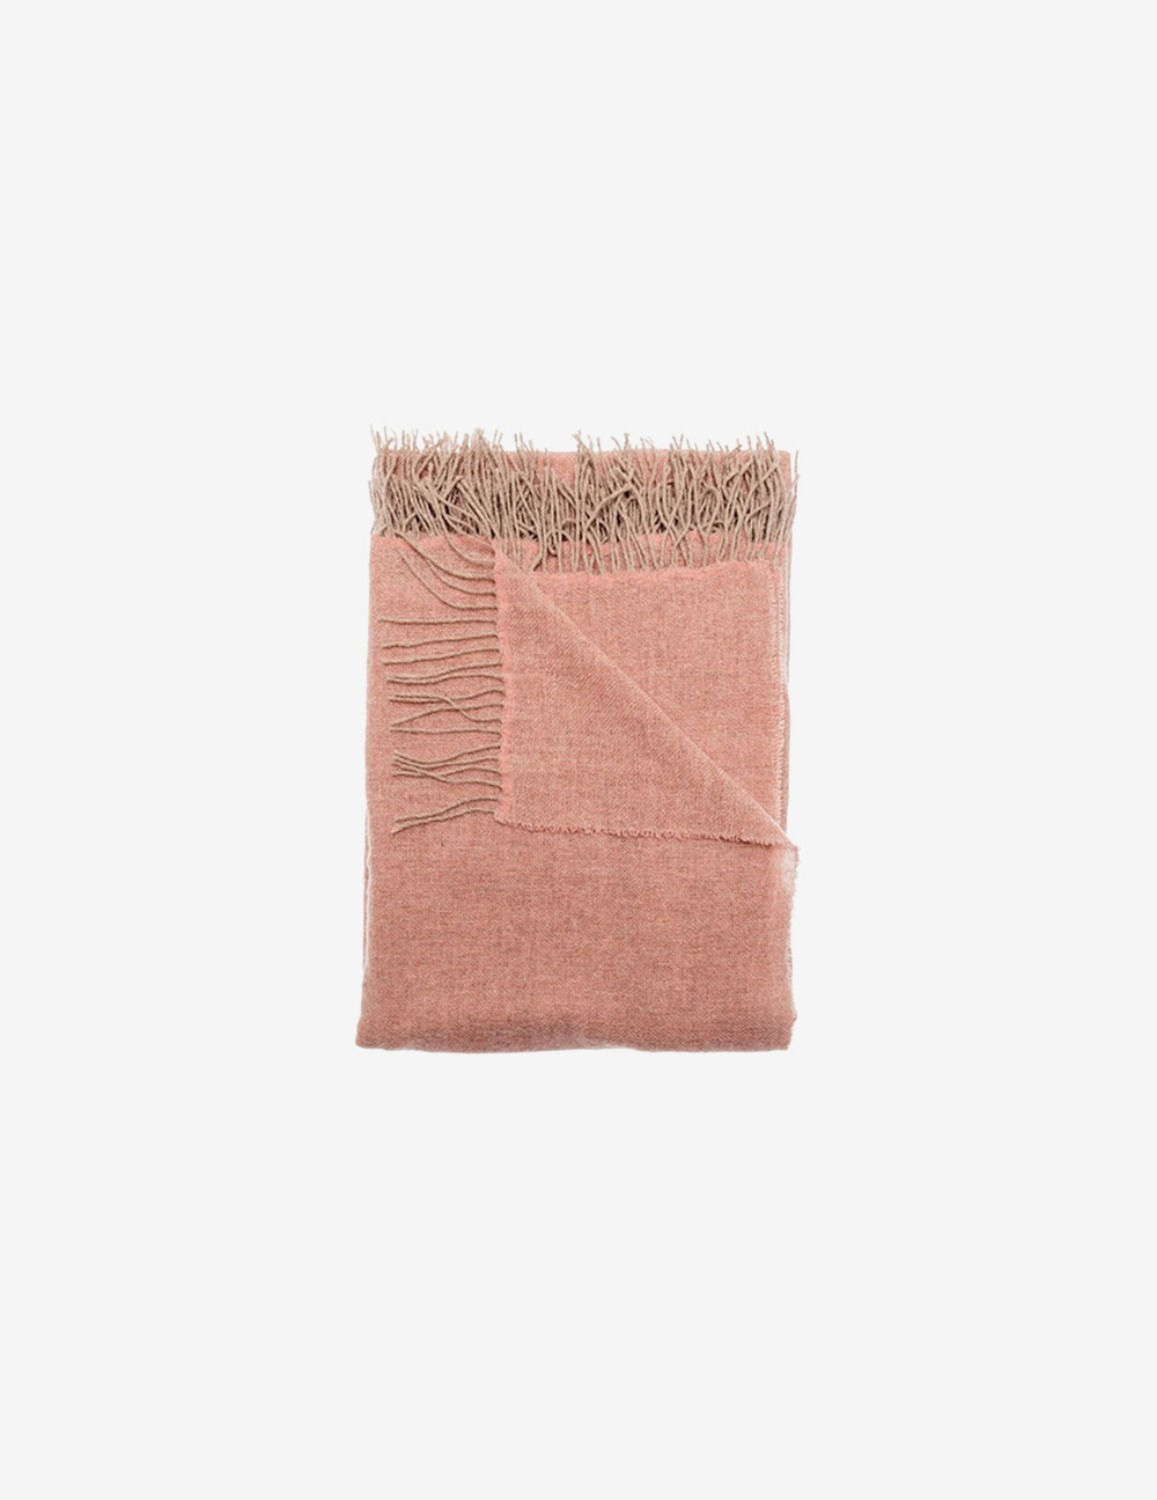 [HIMLA] Victor Throw (Wool) / committed (130x170)